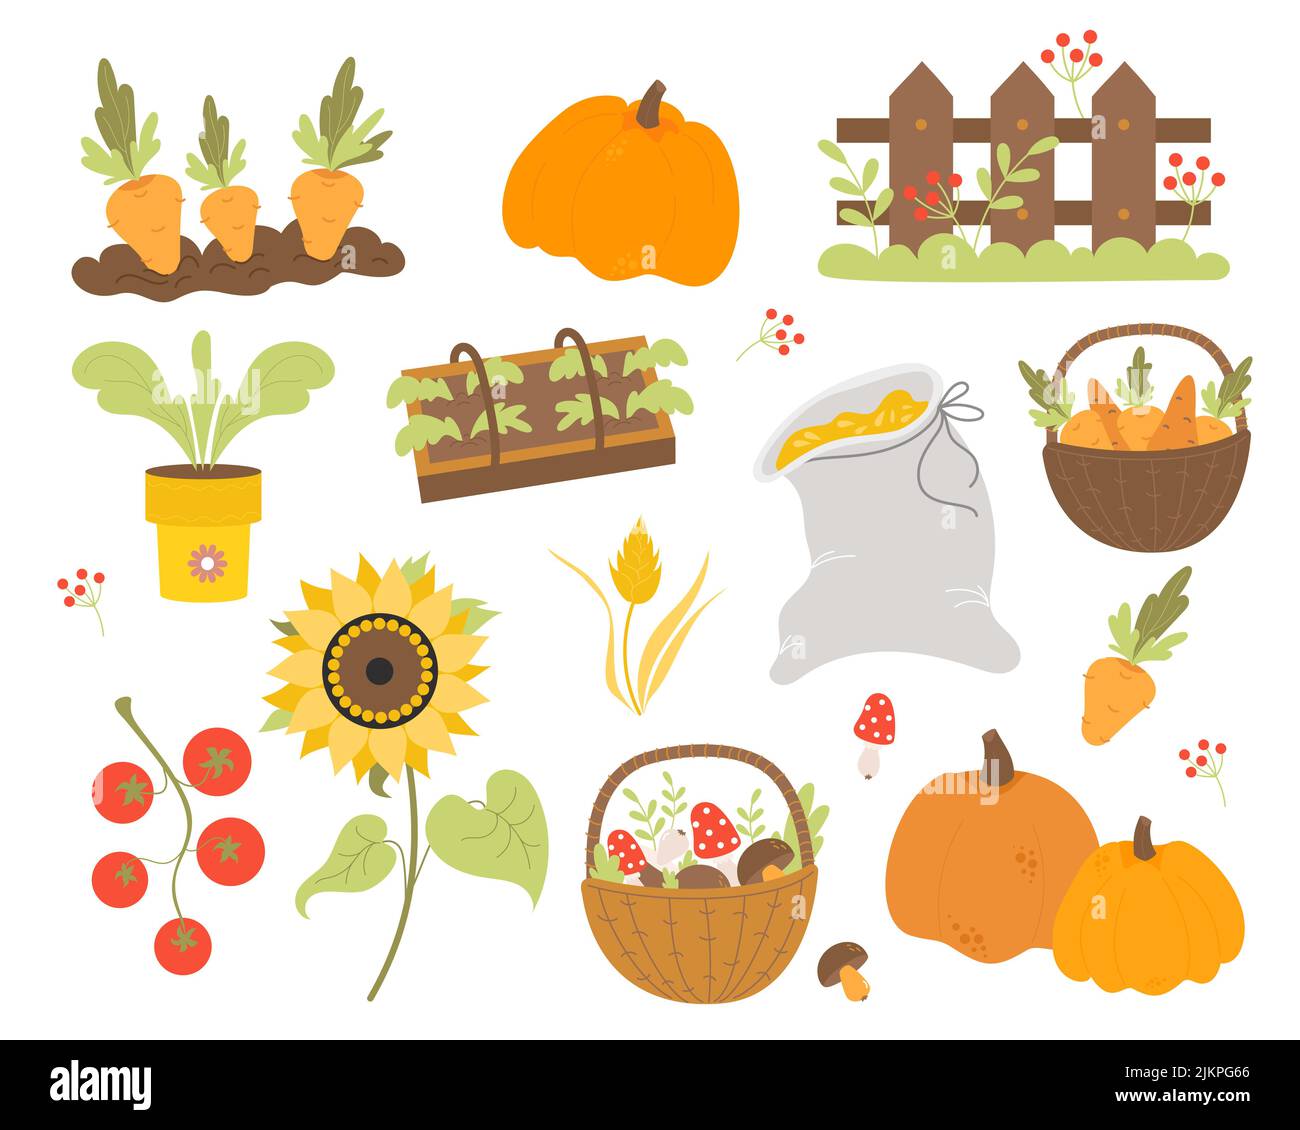 Vector set agriculture. Farming and harvest, bed with carrots, greenhouse with plants, wicker basket with vegetables, sunflower and wooden fence, sack Stock Vector